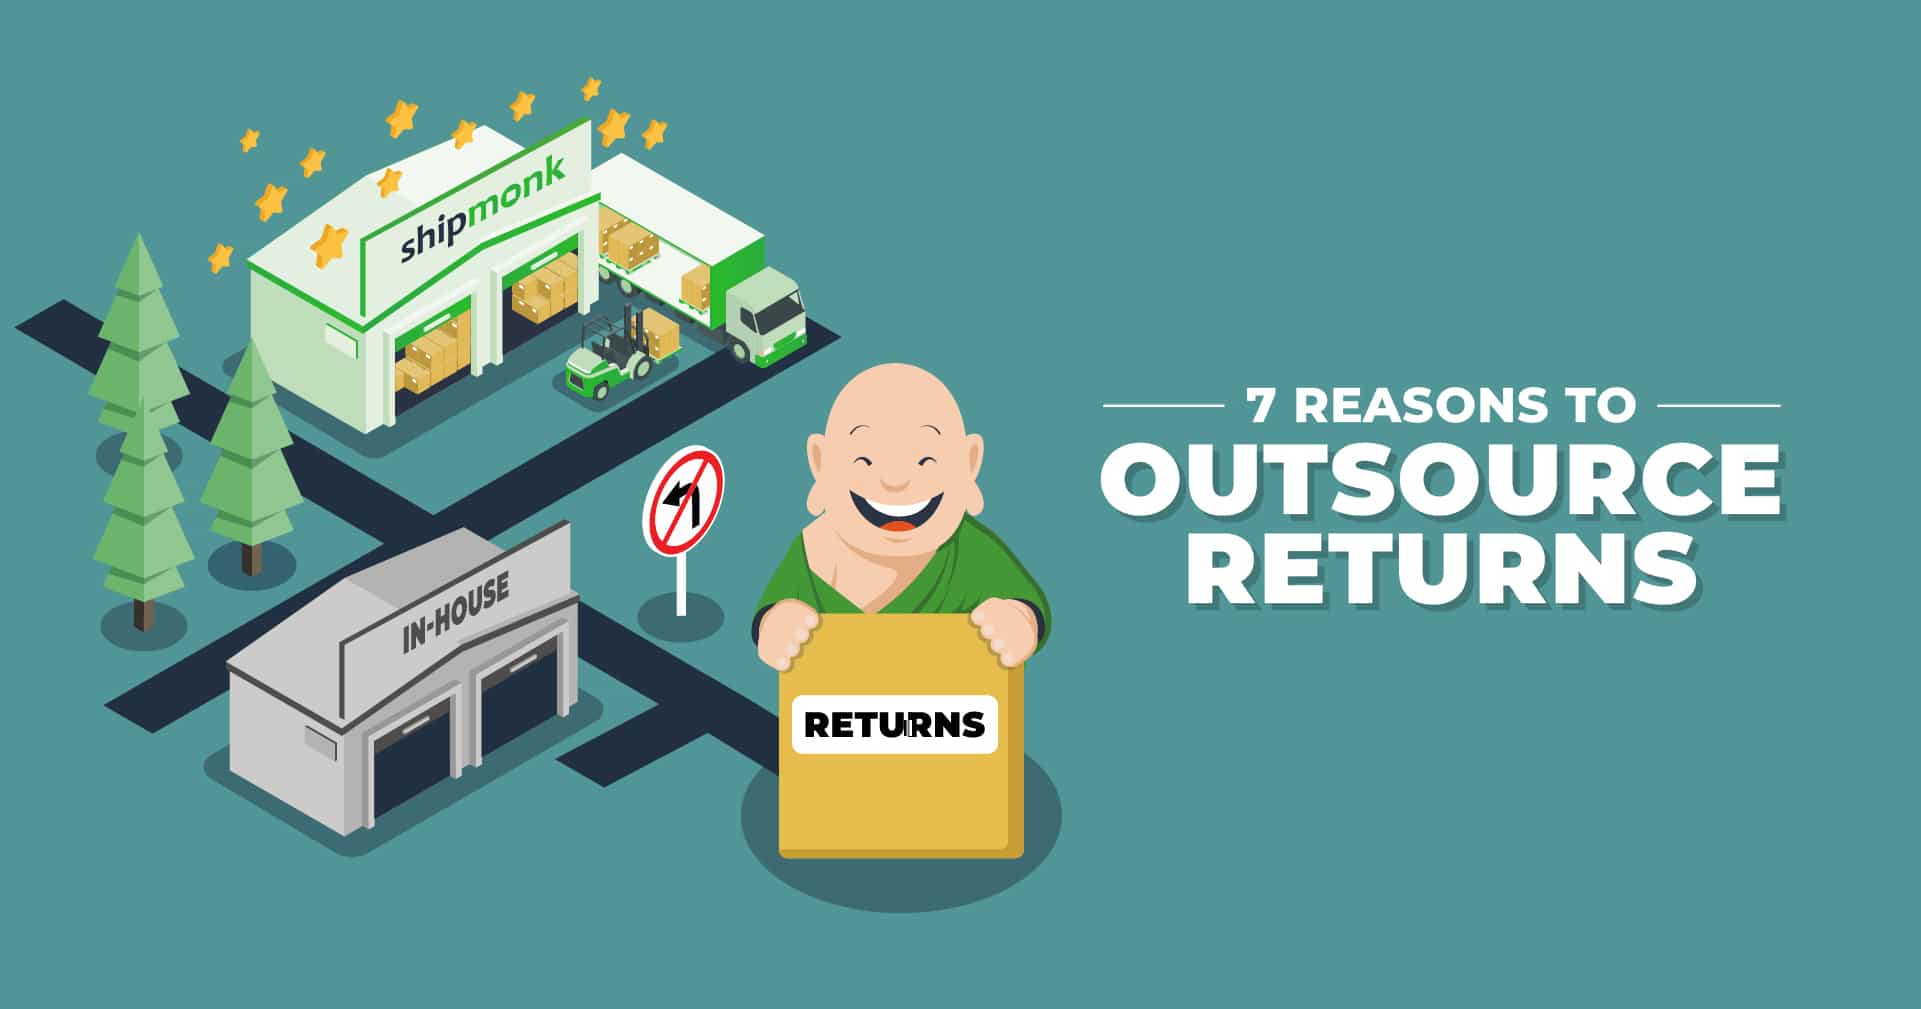 7 Reasons to Outsource Returns